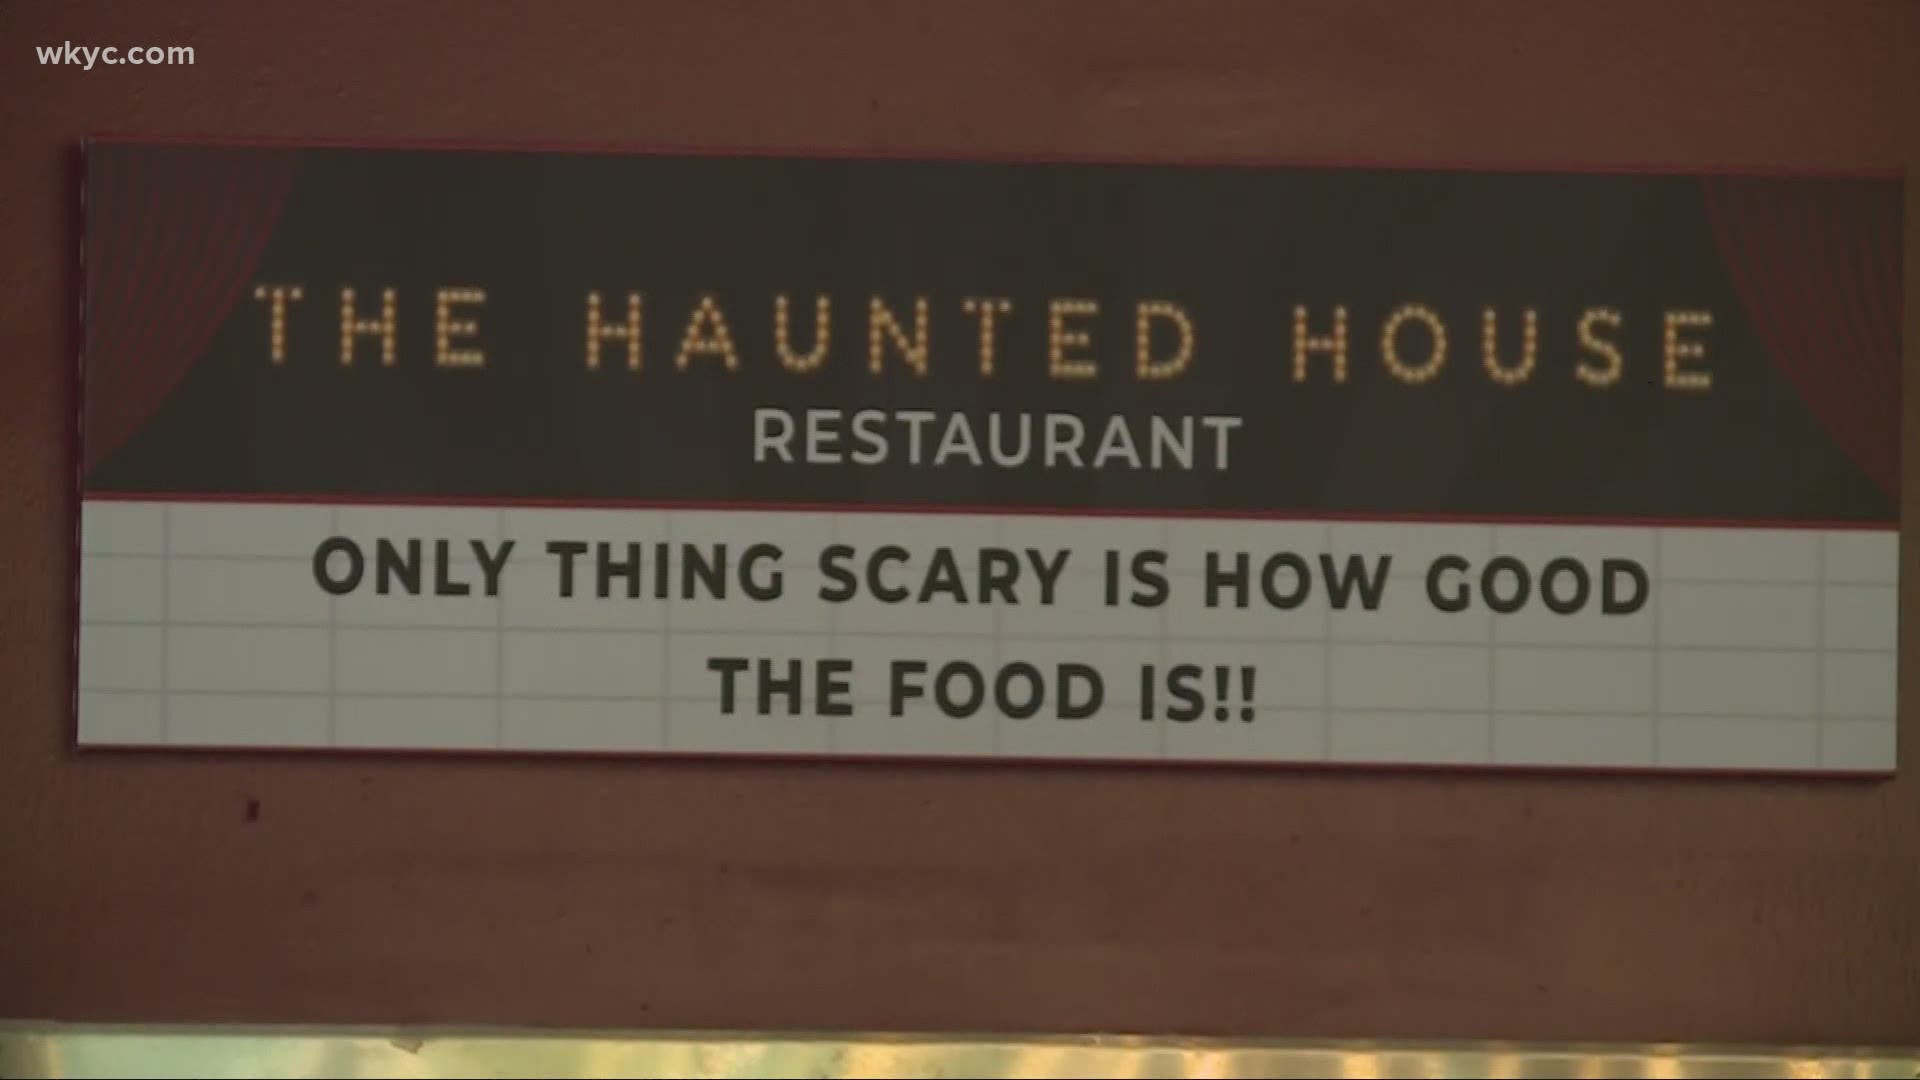 The newest restaurant in Northeast Ohio is sure to raise the hair on your arms- for its delicious food, but also its spooky vibe!